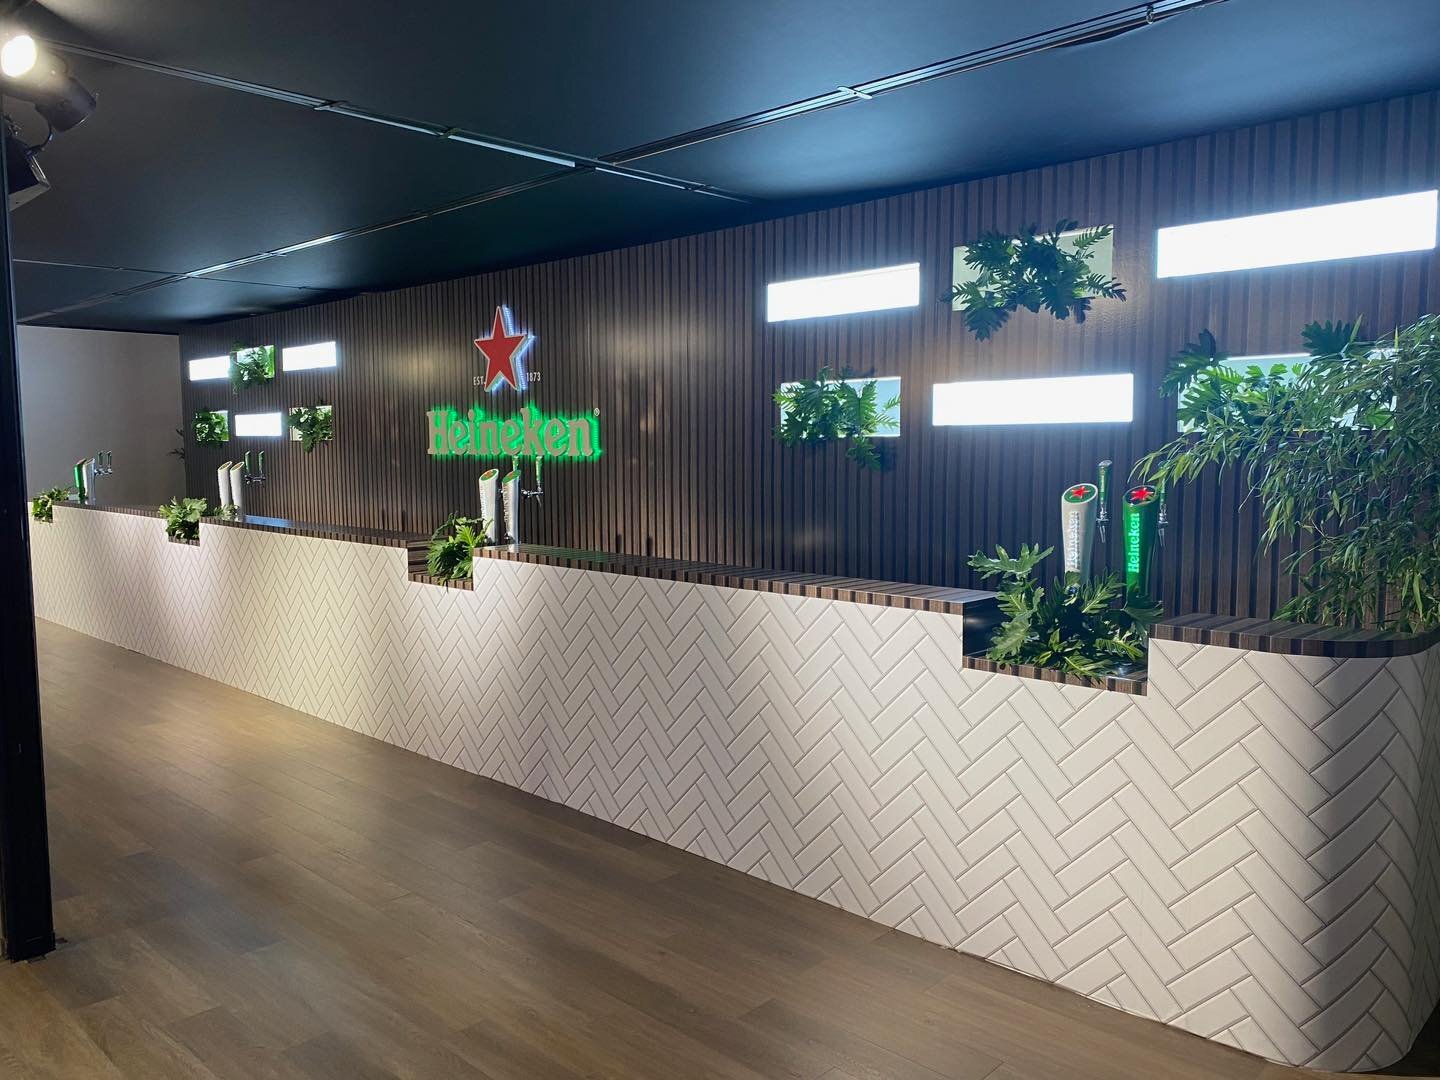 Heineken Bar | Melbourne GP 2023

In second position we have the @heineken Bar!
Situated within the @marriottbonvoy lounge, this was the hottest location to be at over the GP weekend. 

Client: @thevalentinagroupagency 
Design: @thevalentinagroupagen